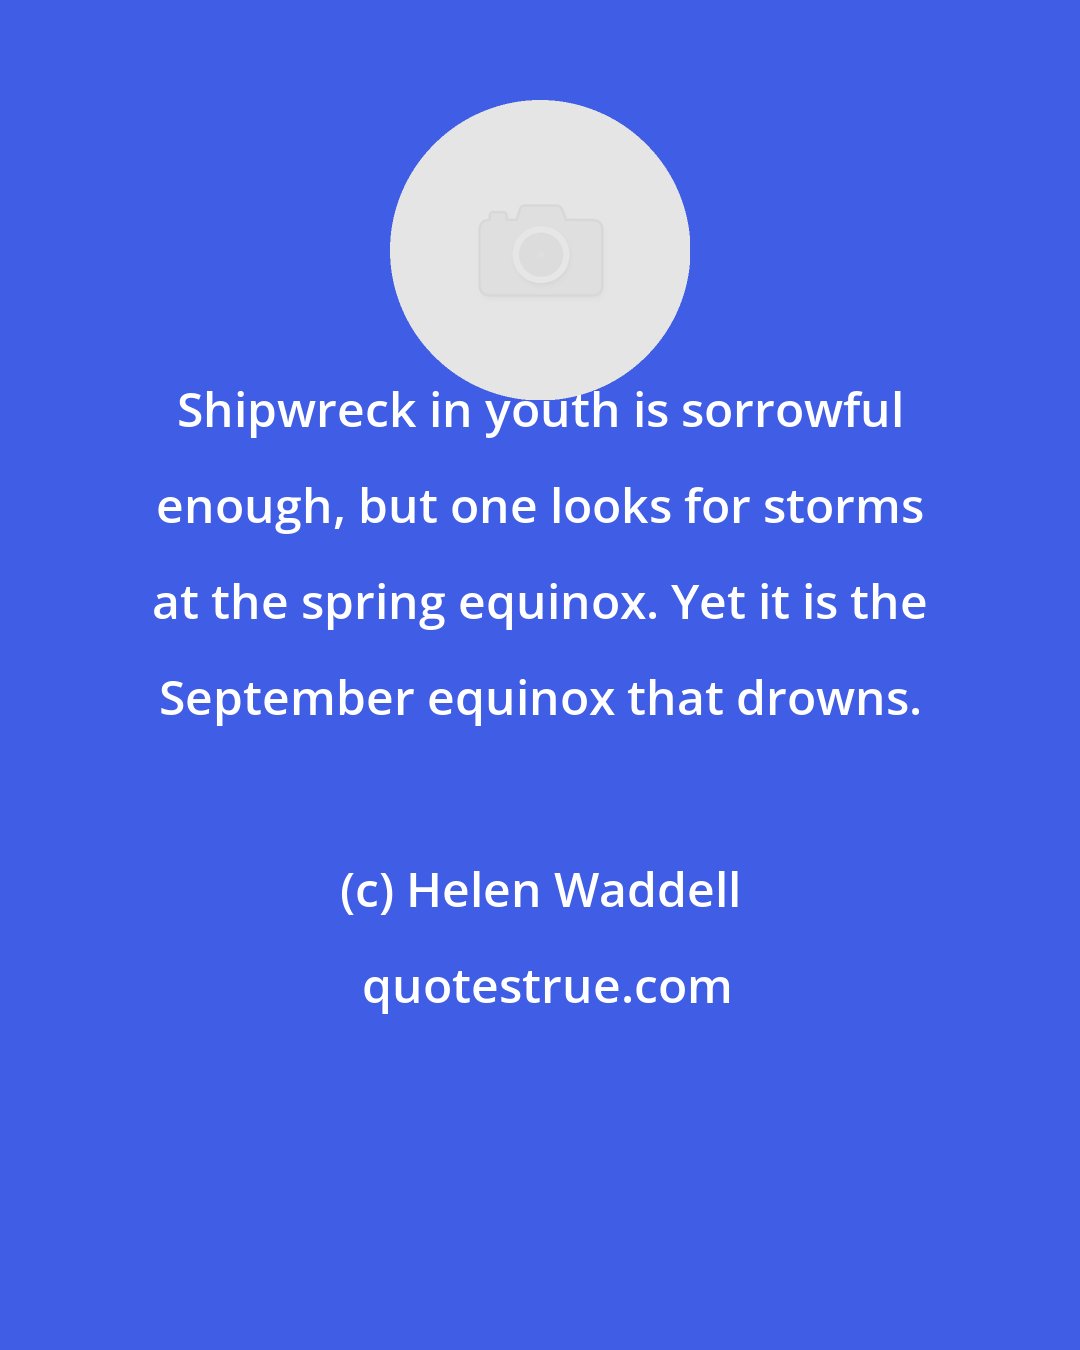 Helen Waddell: Shipwreck in youth is sorrowful enough, but one looks for storms at the spring equinox. Yet it is the September equinox that drowns.